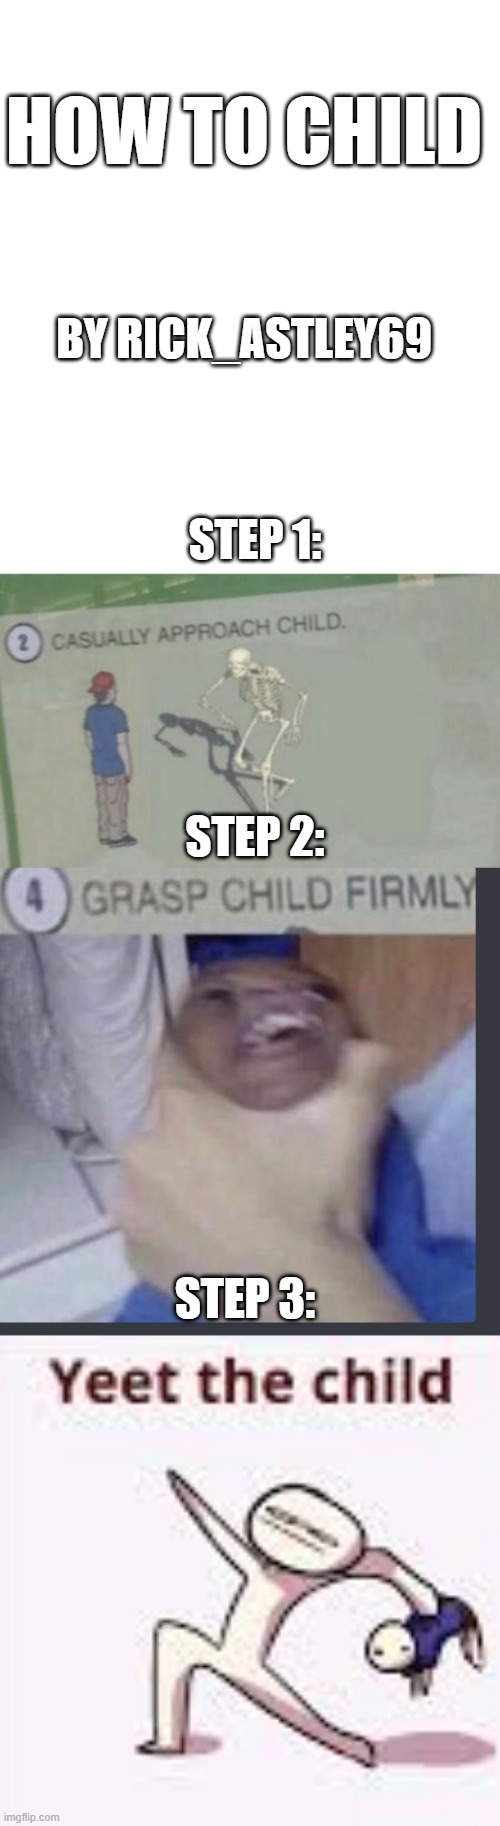 This is ow you child | HOW TO CHILD; BY RICK_ASTLEY69; STEP 1:; STEP 2:; STEP 3: | image tagged in blank white template,casually approach child,grasp child firmly,single yeet the child panel,how to child | made w/ Imgflip meme maker